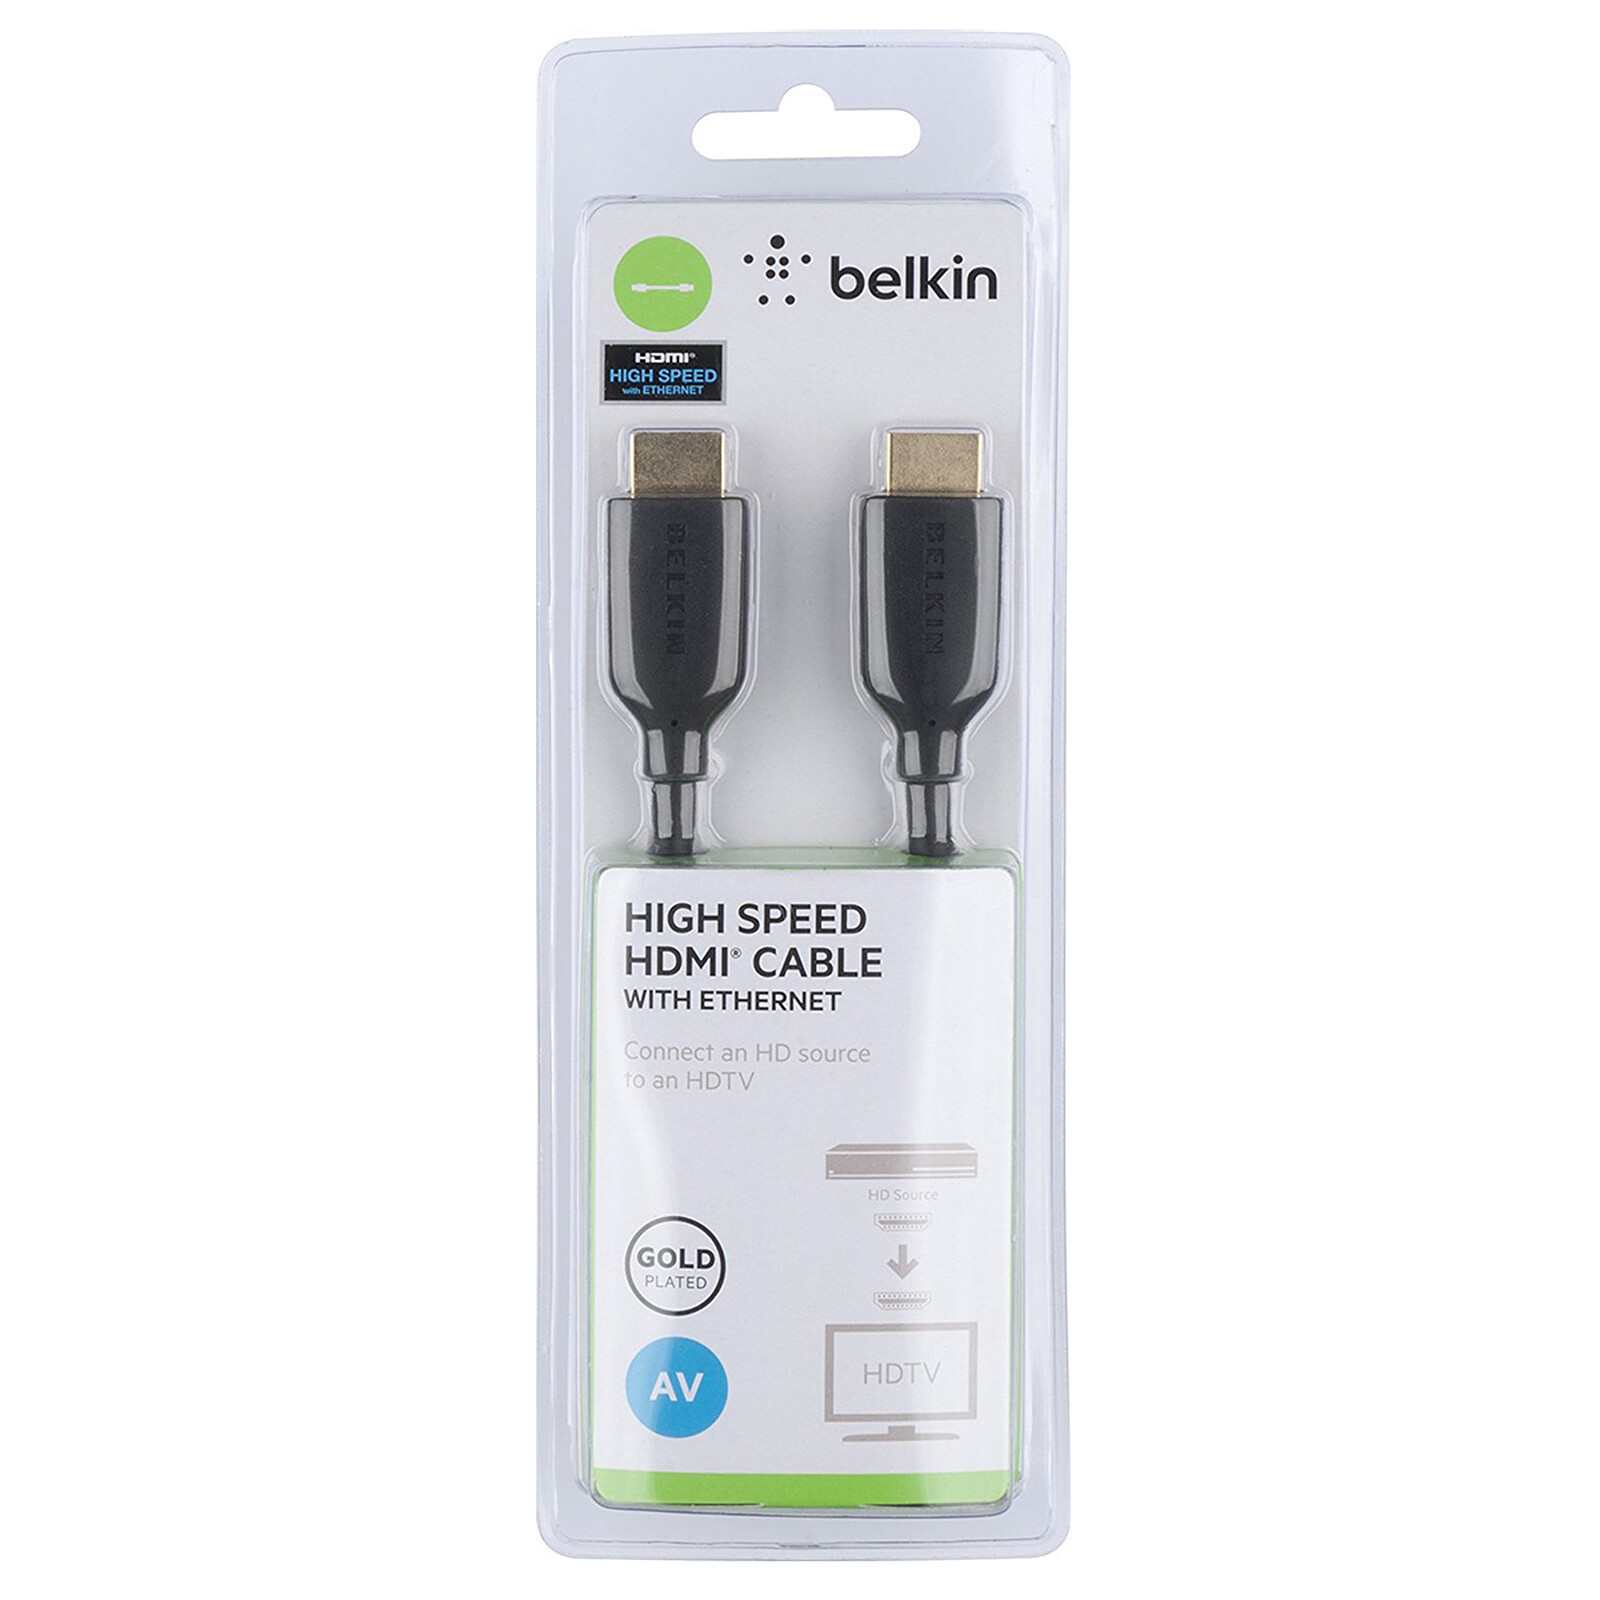 Belkin High Speed 4K HDMI Cable with Ethernet, 2m, Black